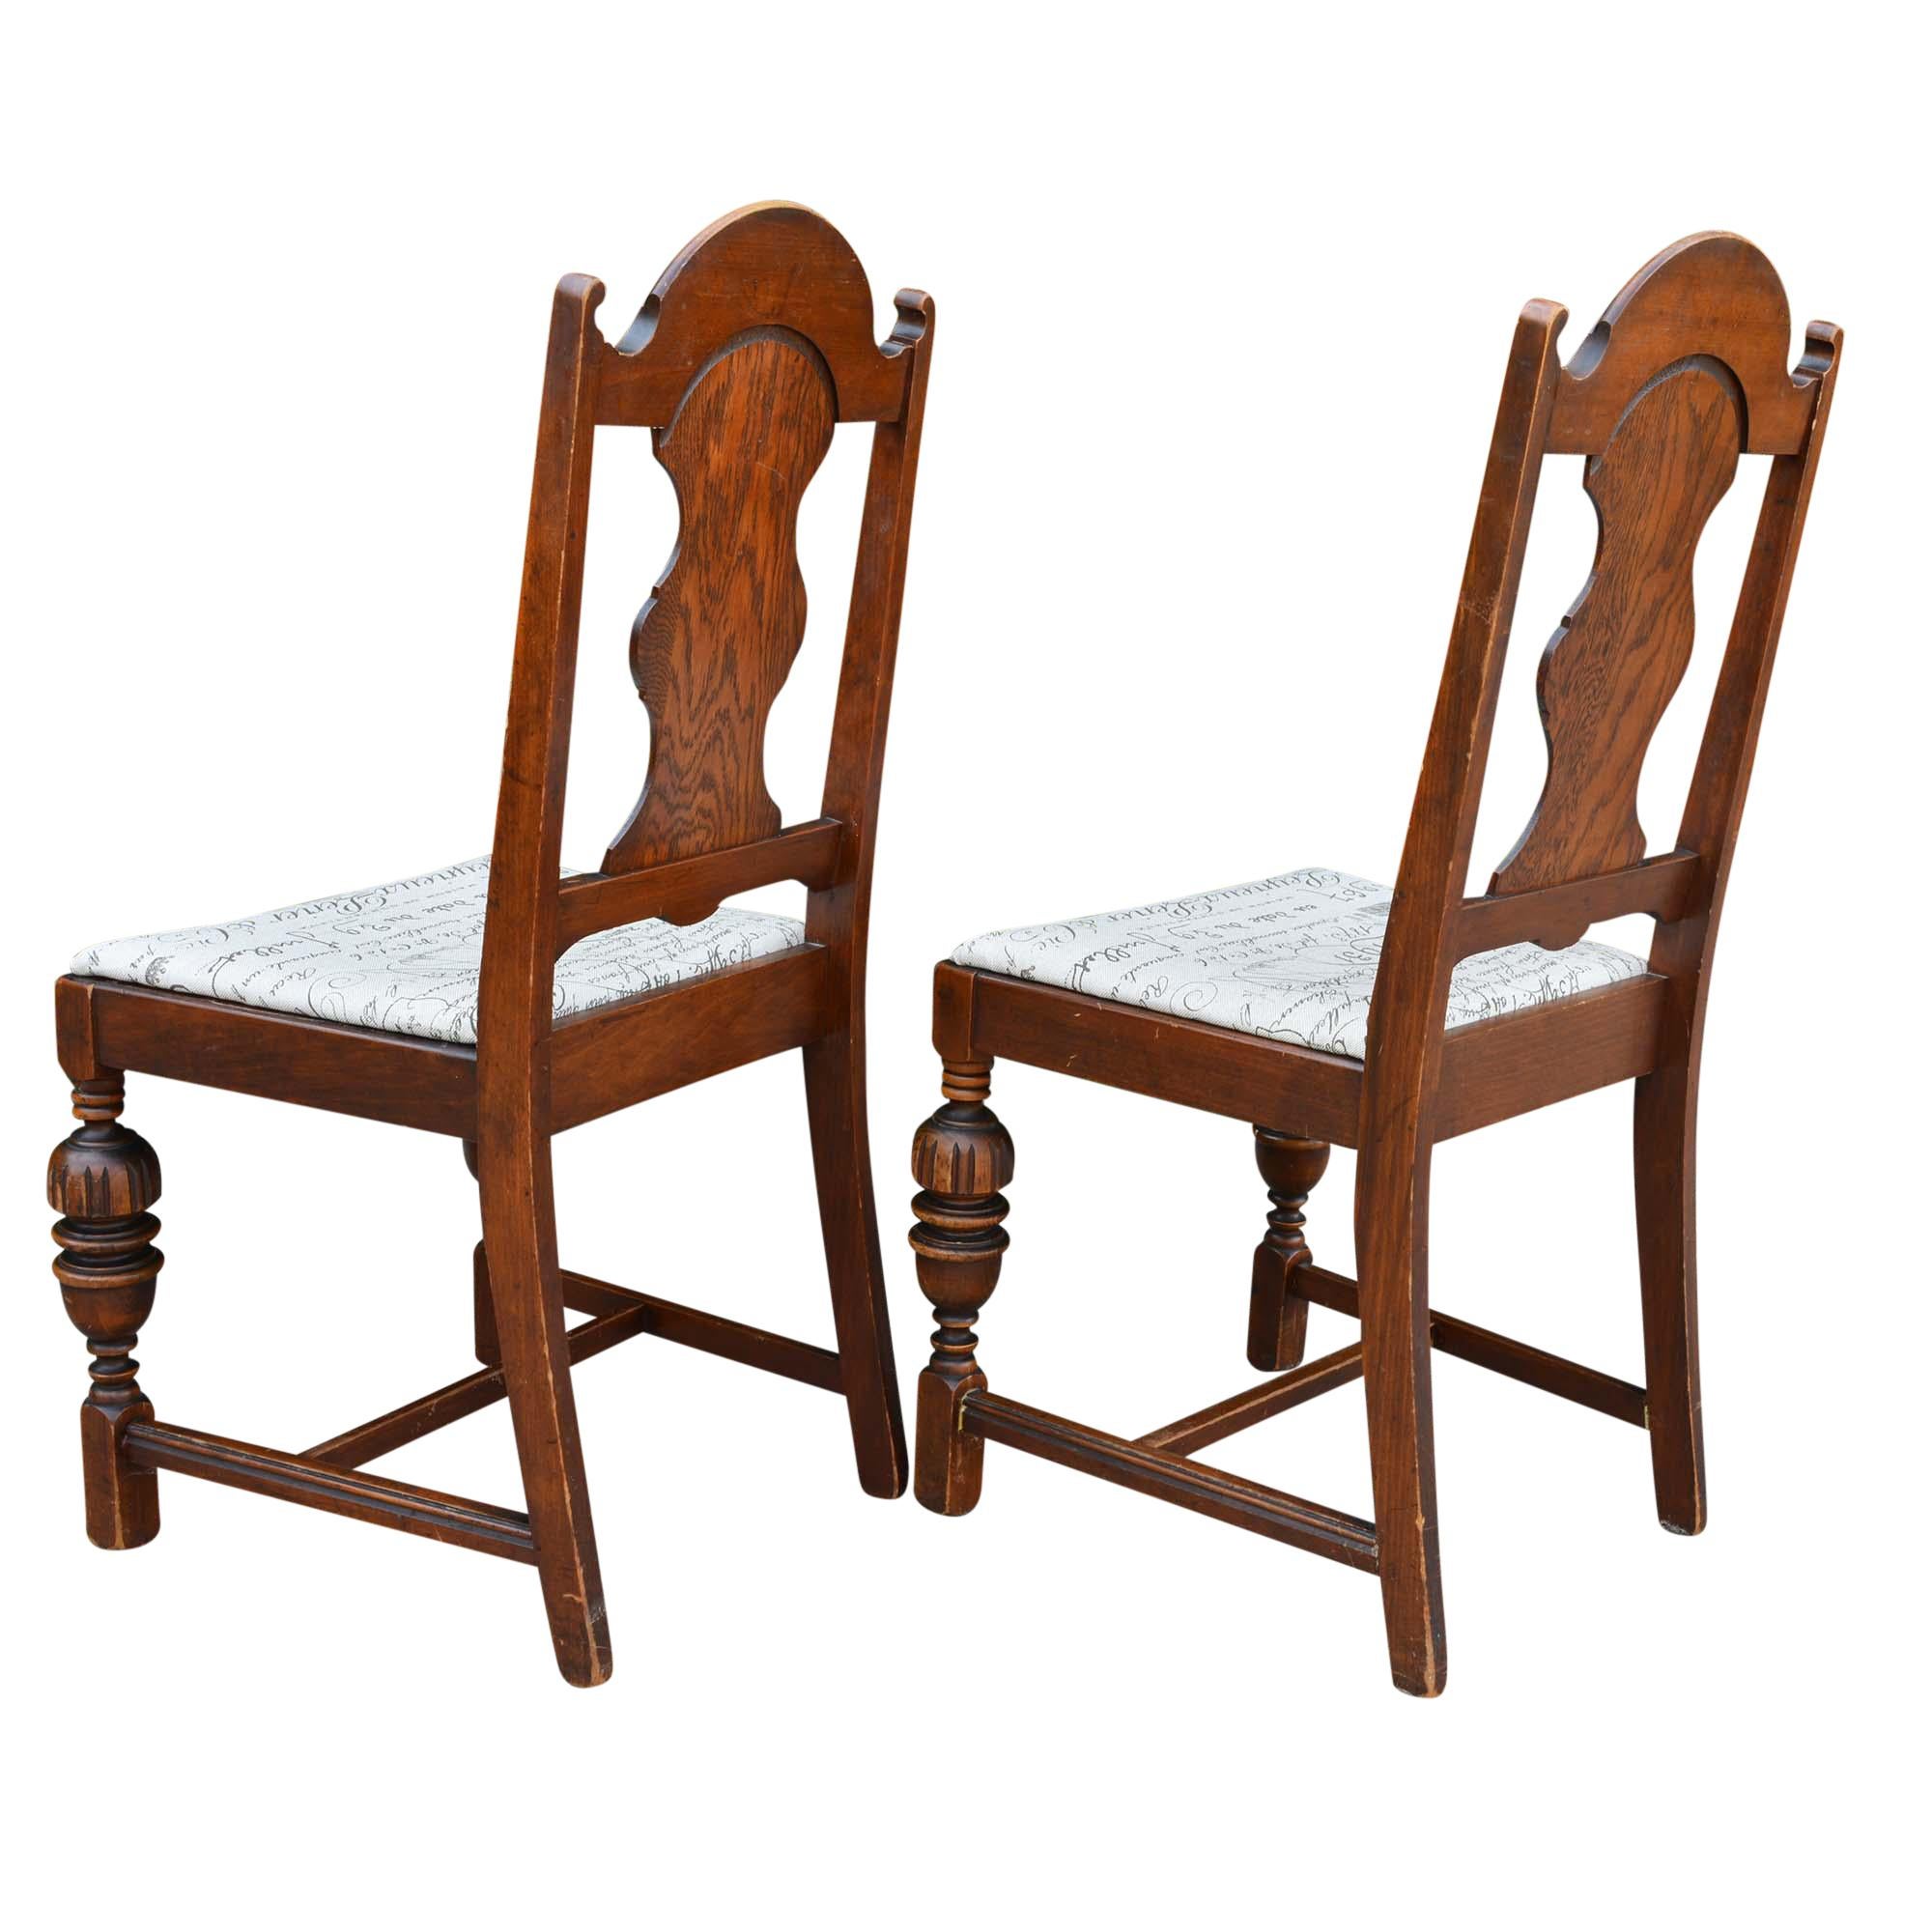 Jacobean Antique Spanish Style Chairs with Taupe and Brown Upholstered Seat Pair For Sale